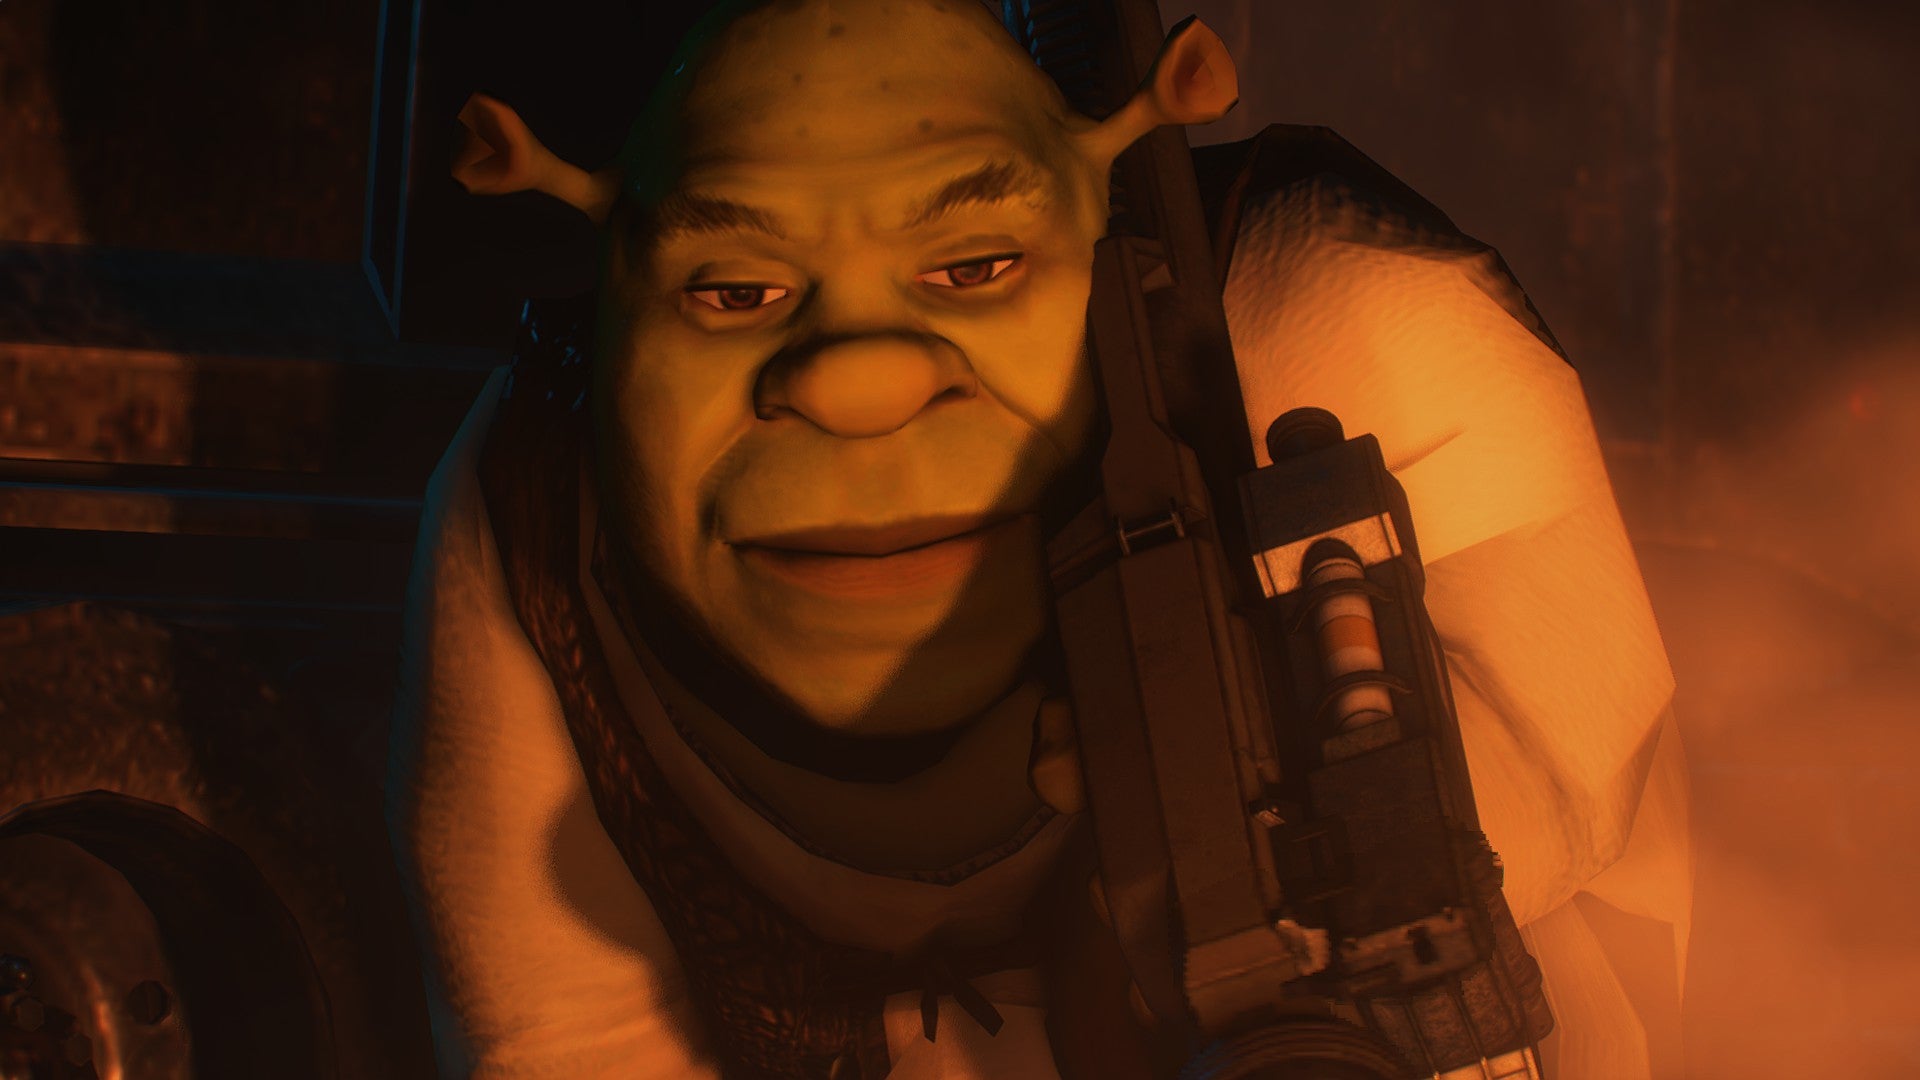 Image for Nightmare Resident Evil 3 mod replaces Nemesis with Shrek